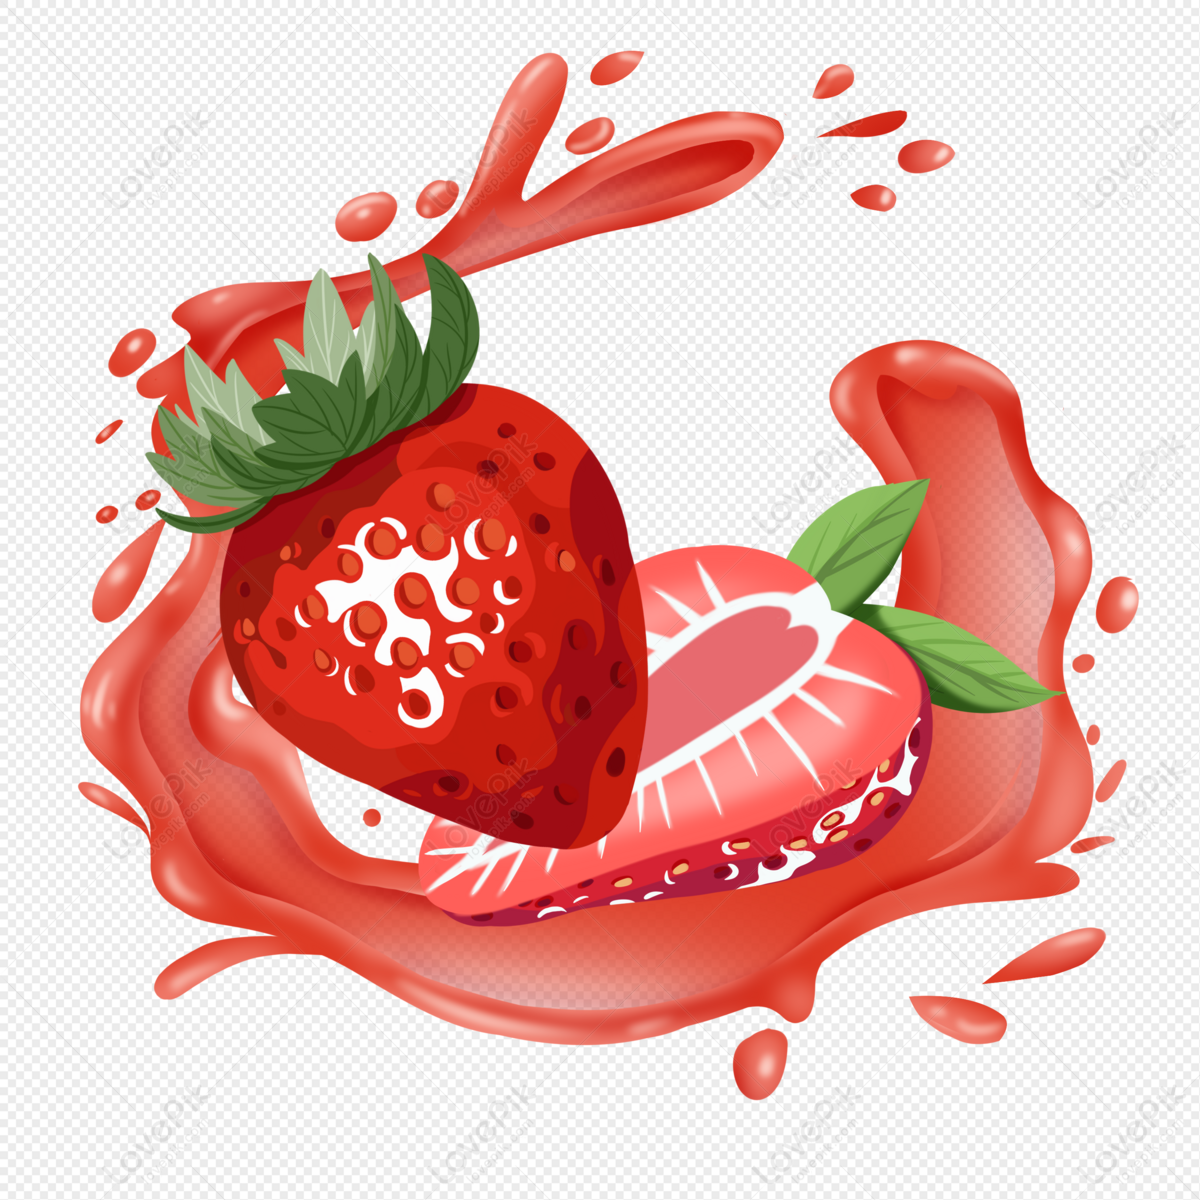 strawberry-strawberry-packaging-berry-splash-juice-png-image-free